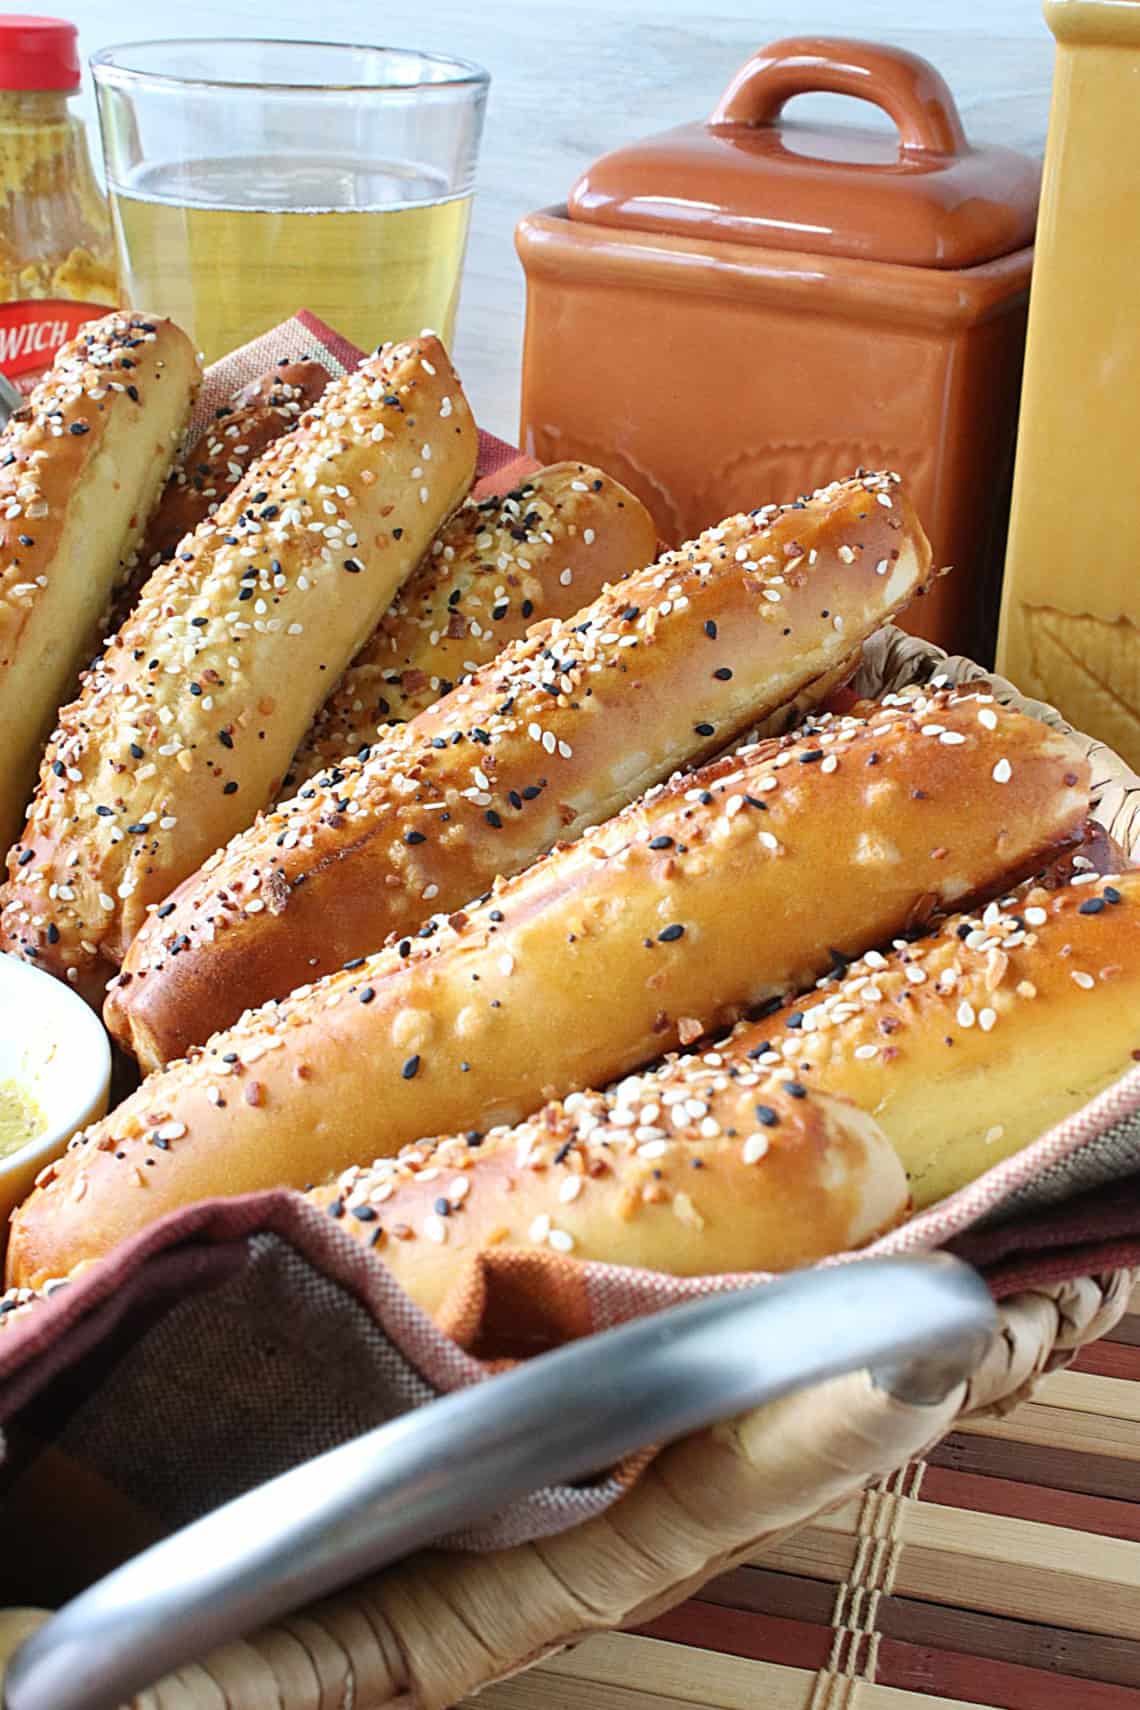 A bunch of golden-brown Soft Pretzel Rods in a basket with a glass of beer and some mustard in the background.